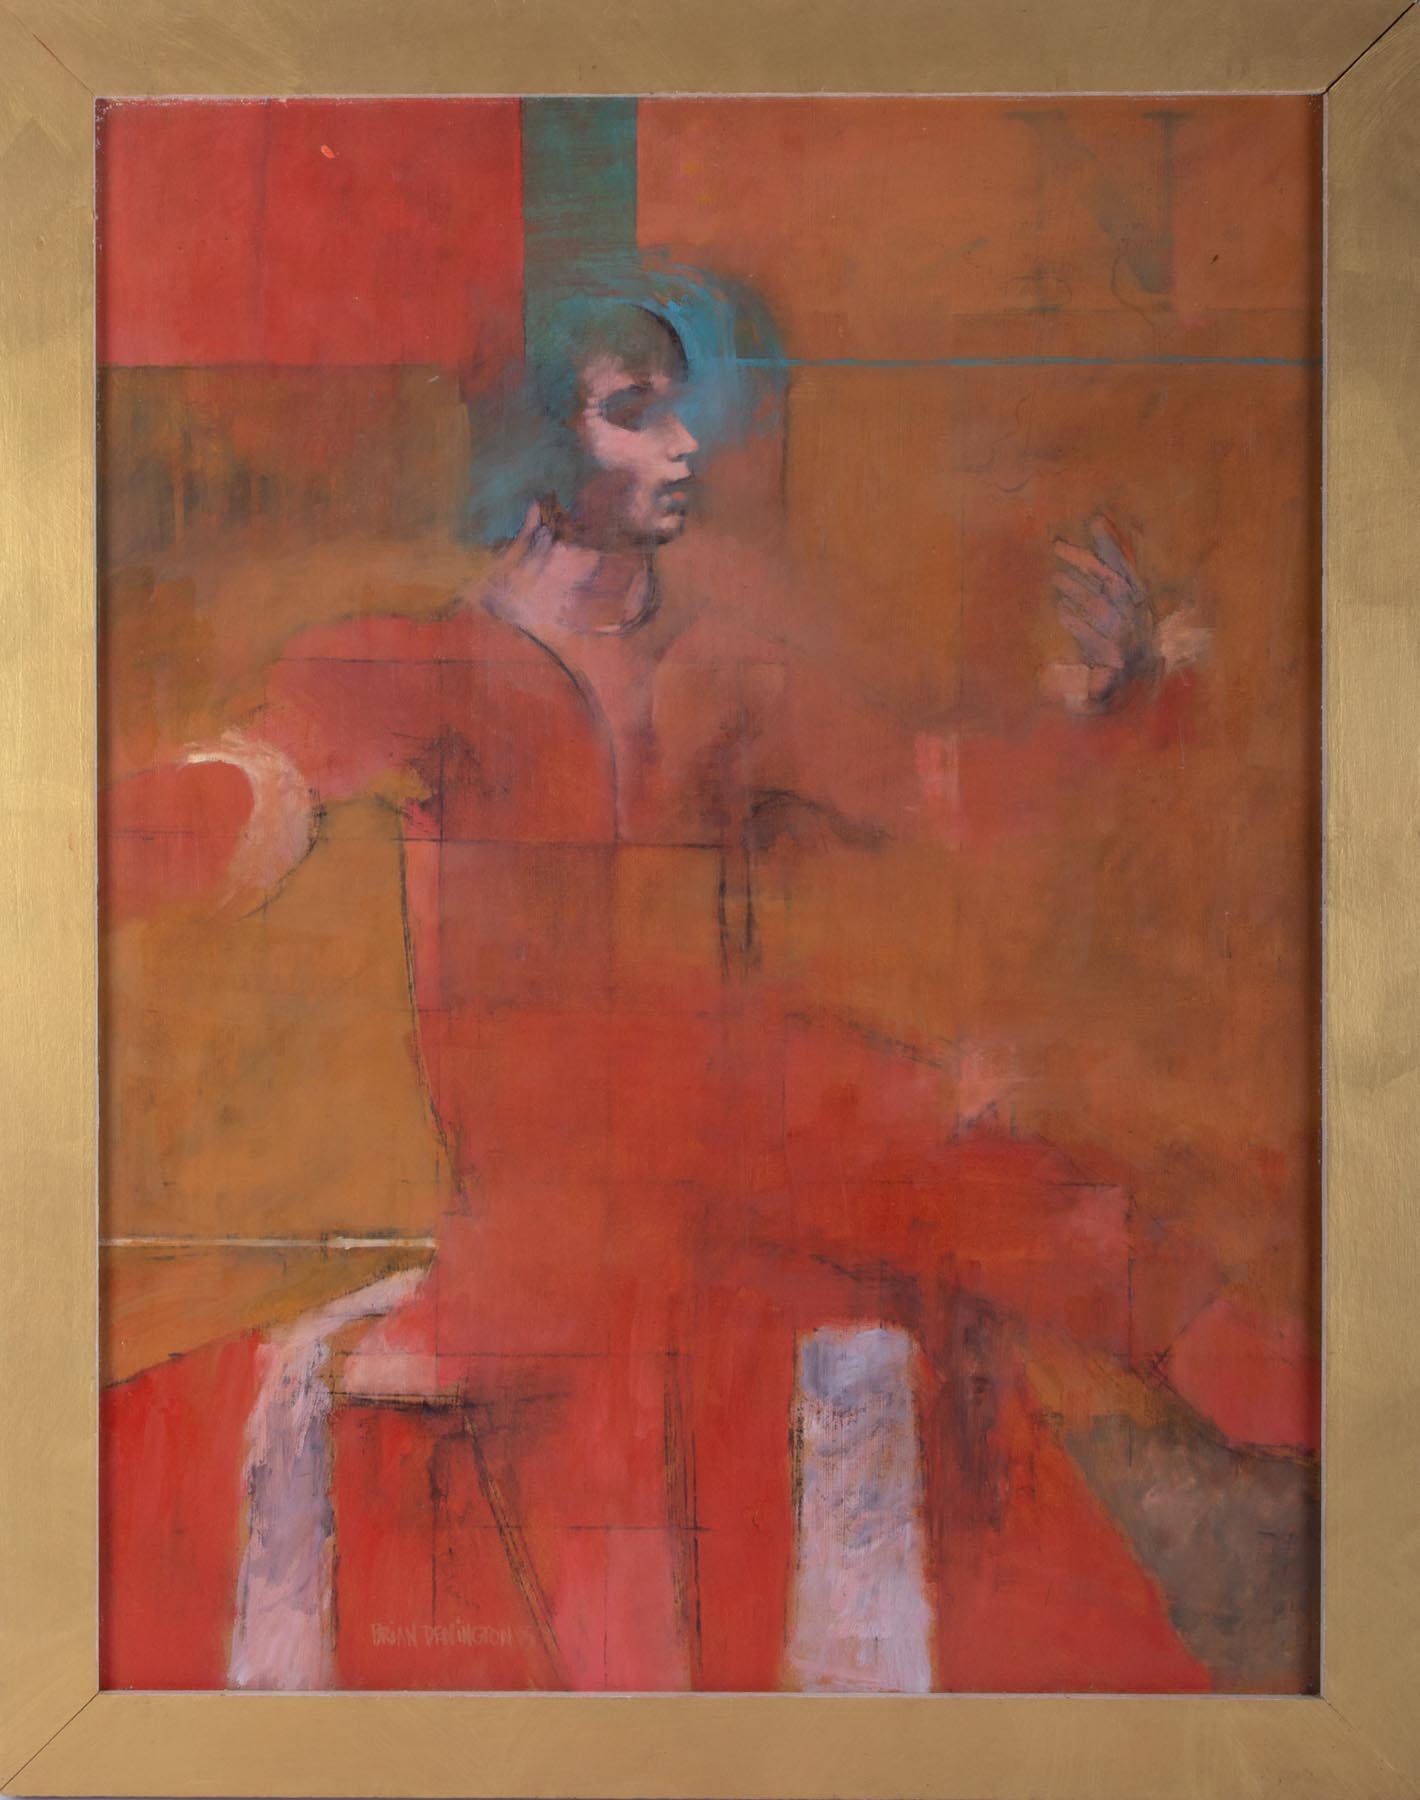 Brian Denington (b1944), 'Figure' oil on board signed and dated 05, 70cm x 53cm, framed.